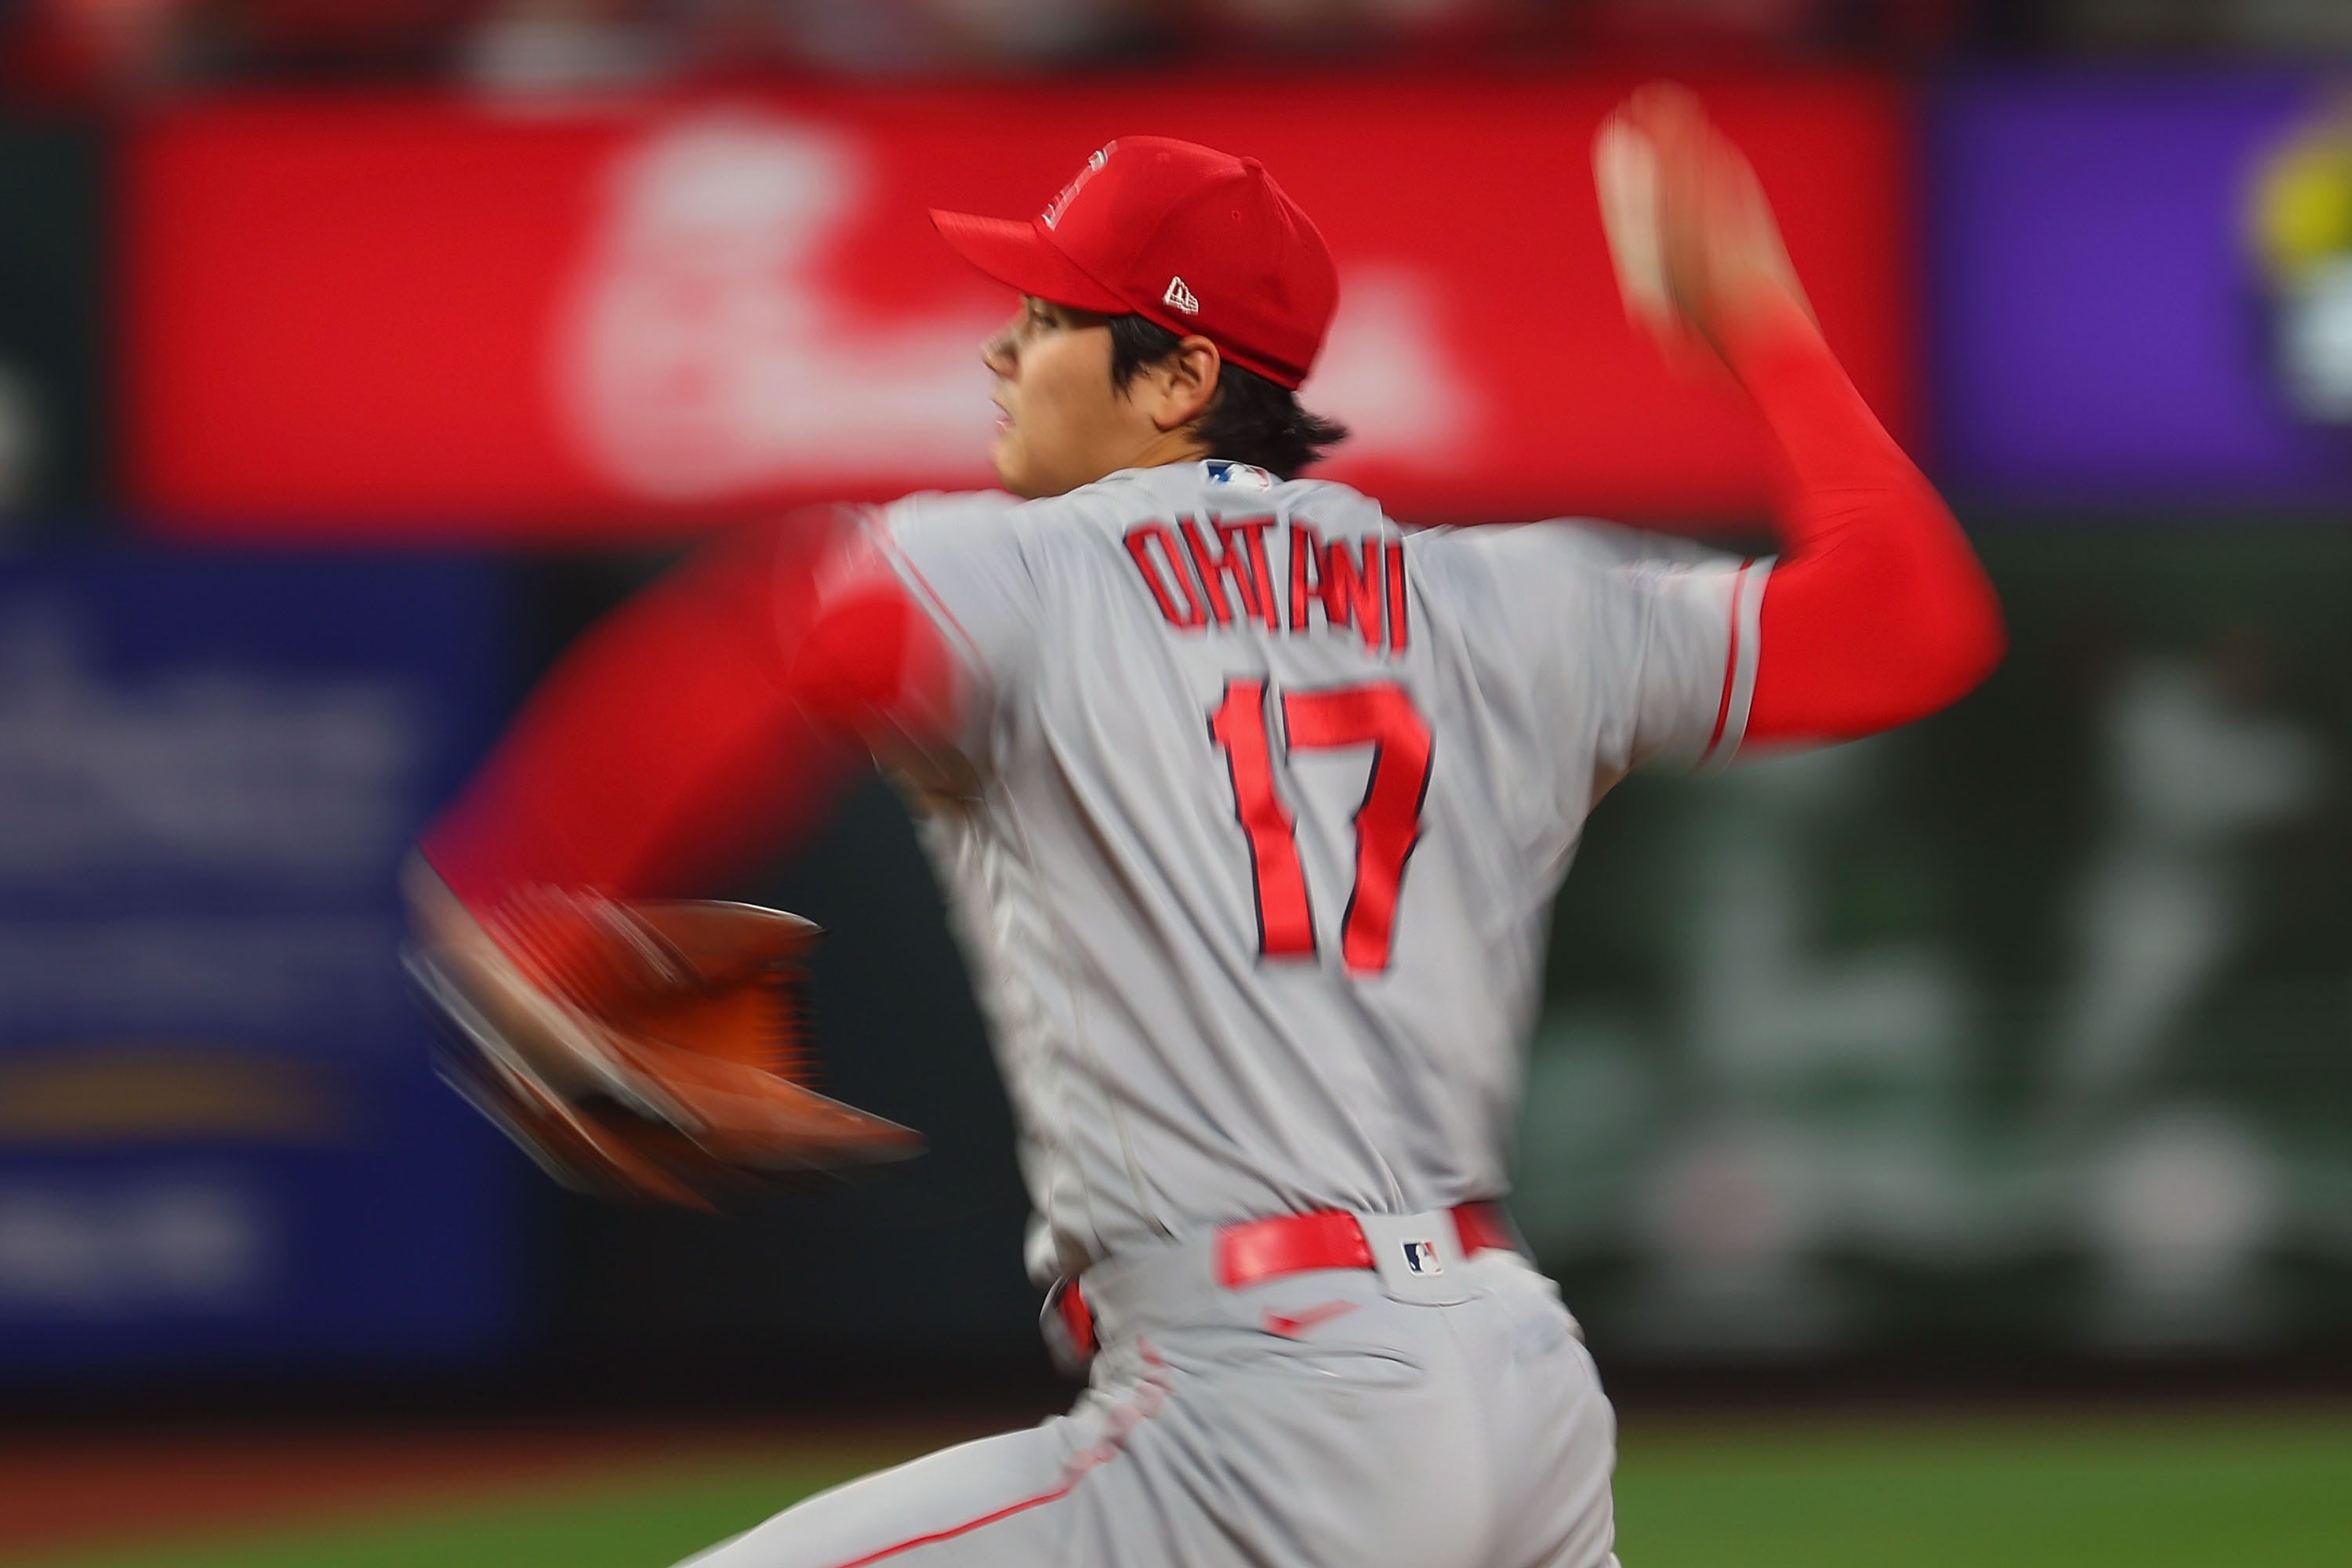 Shohei Ohtani, Kyle Schwarber named Players of the Week